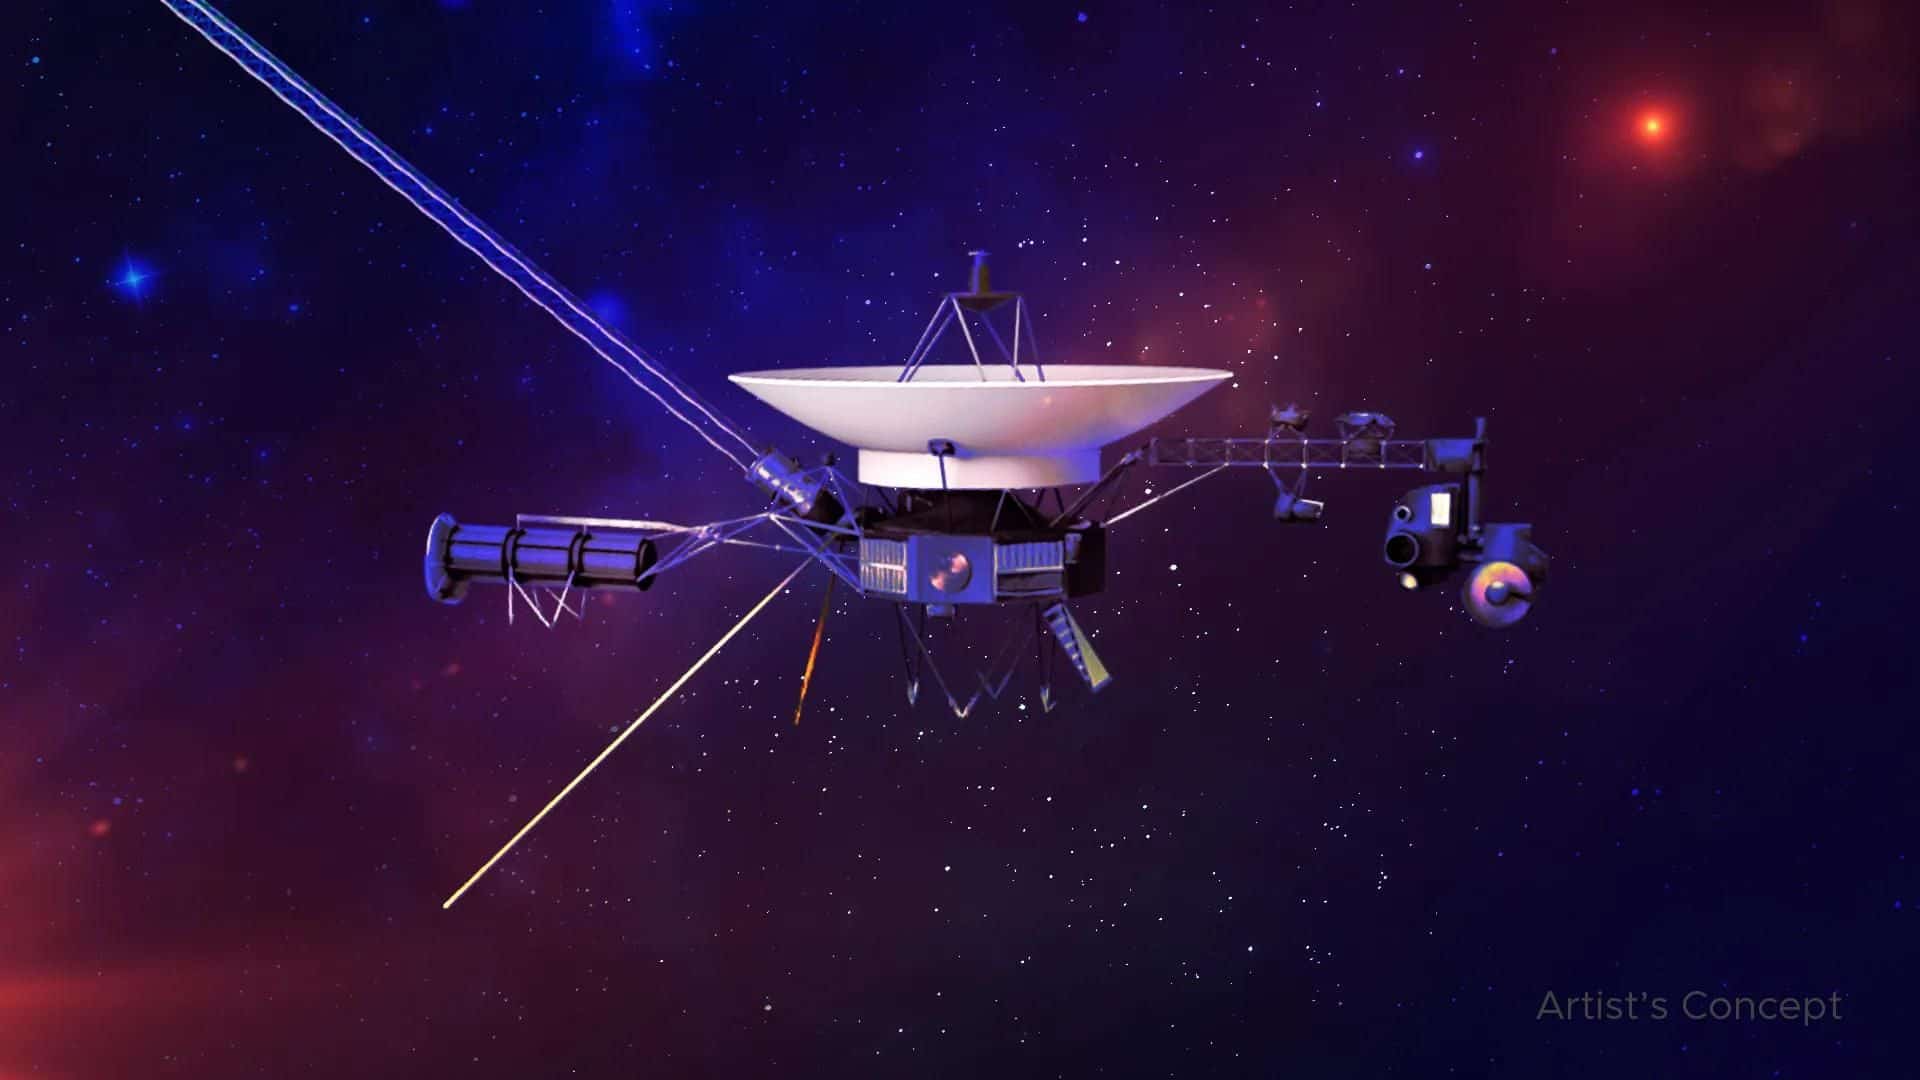 An artist’s illustration of the Voyager spacecraft currently exploring interstellar space